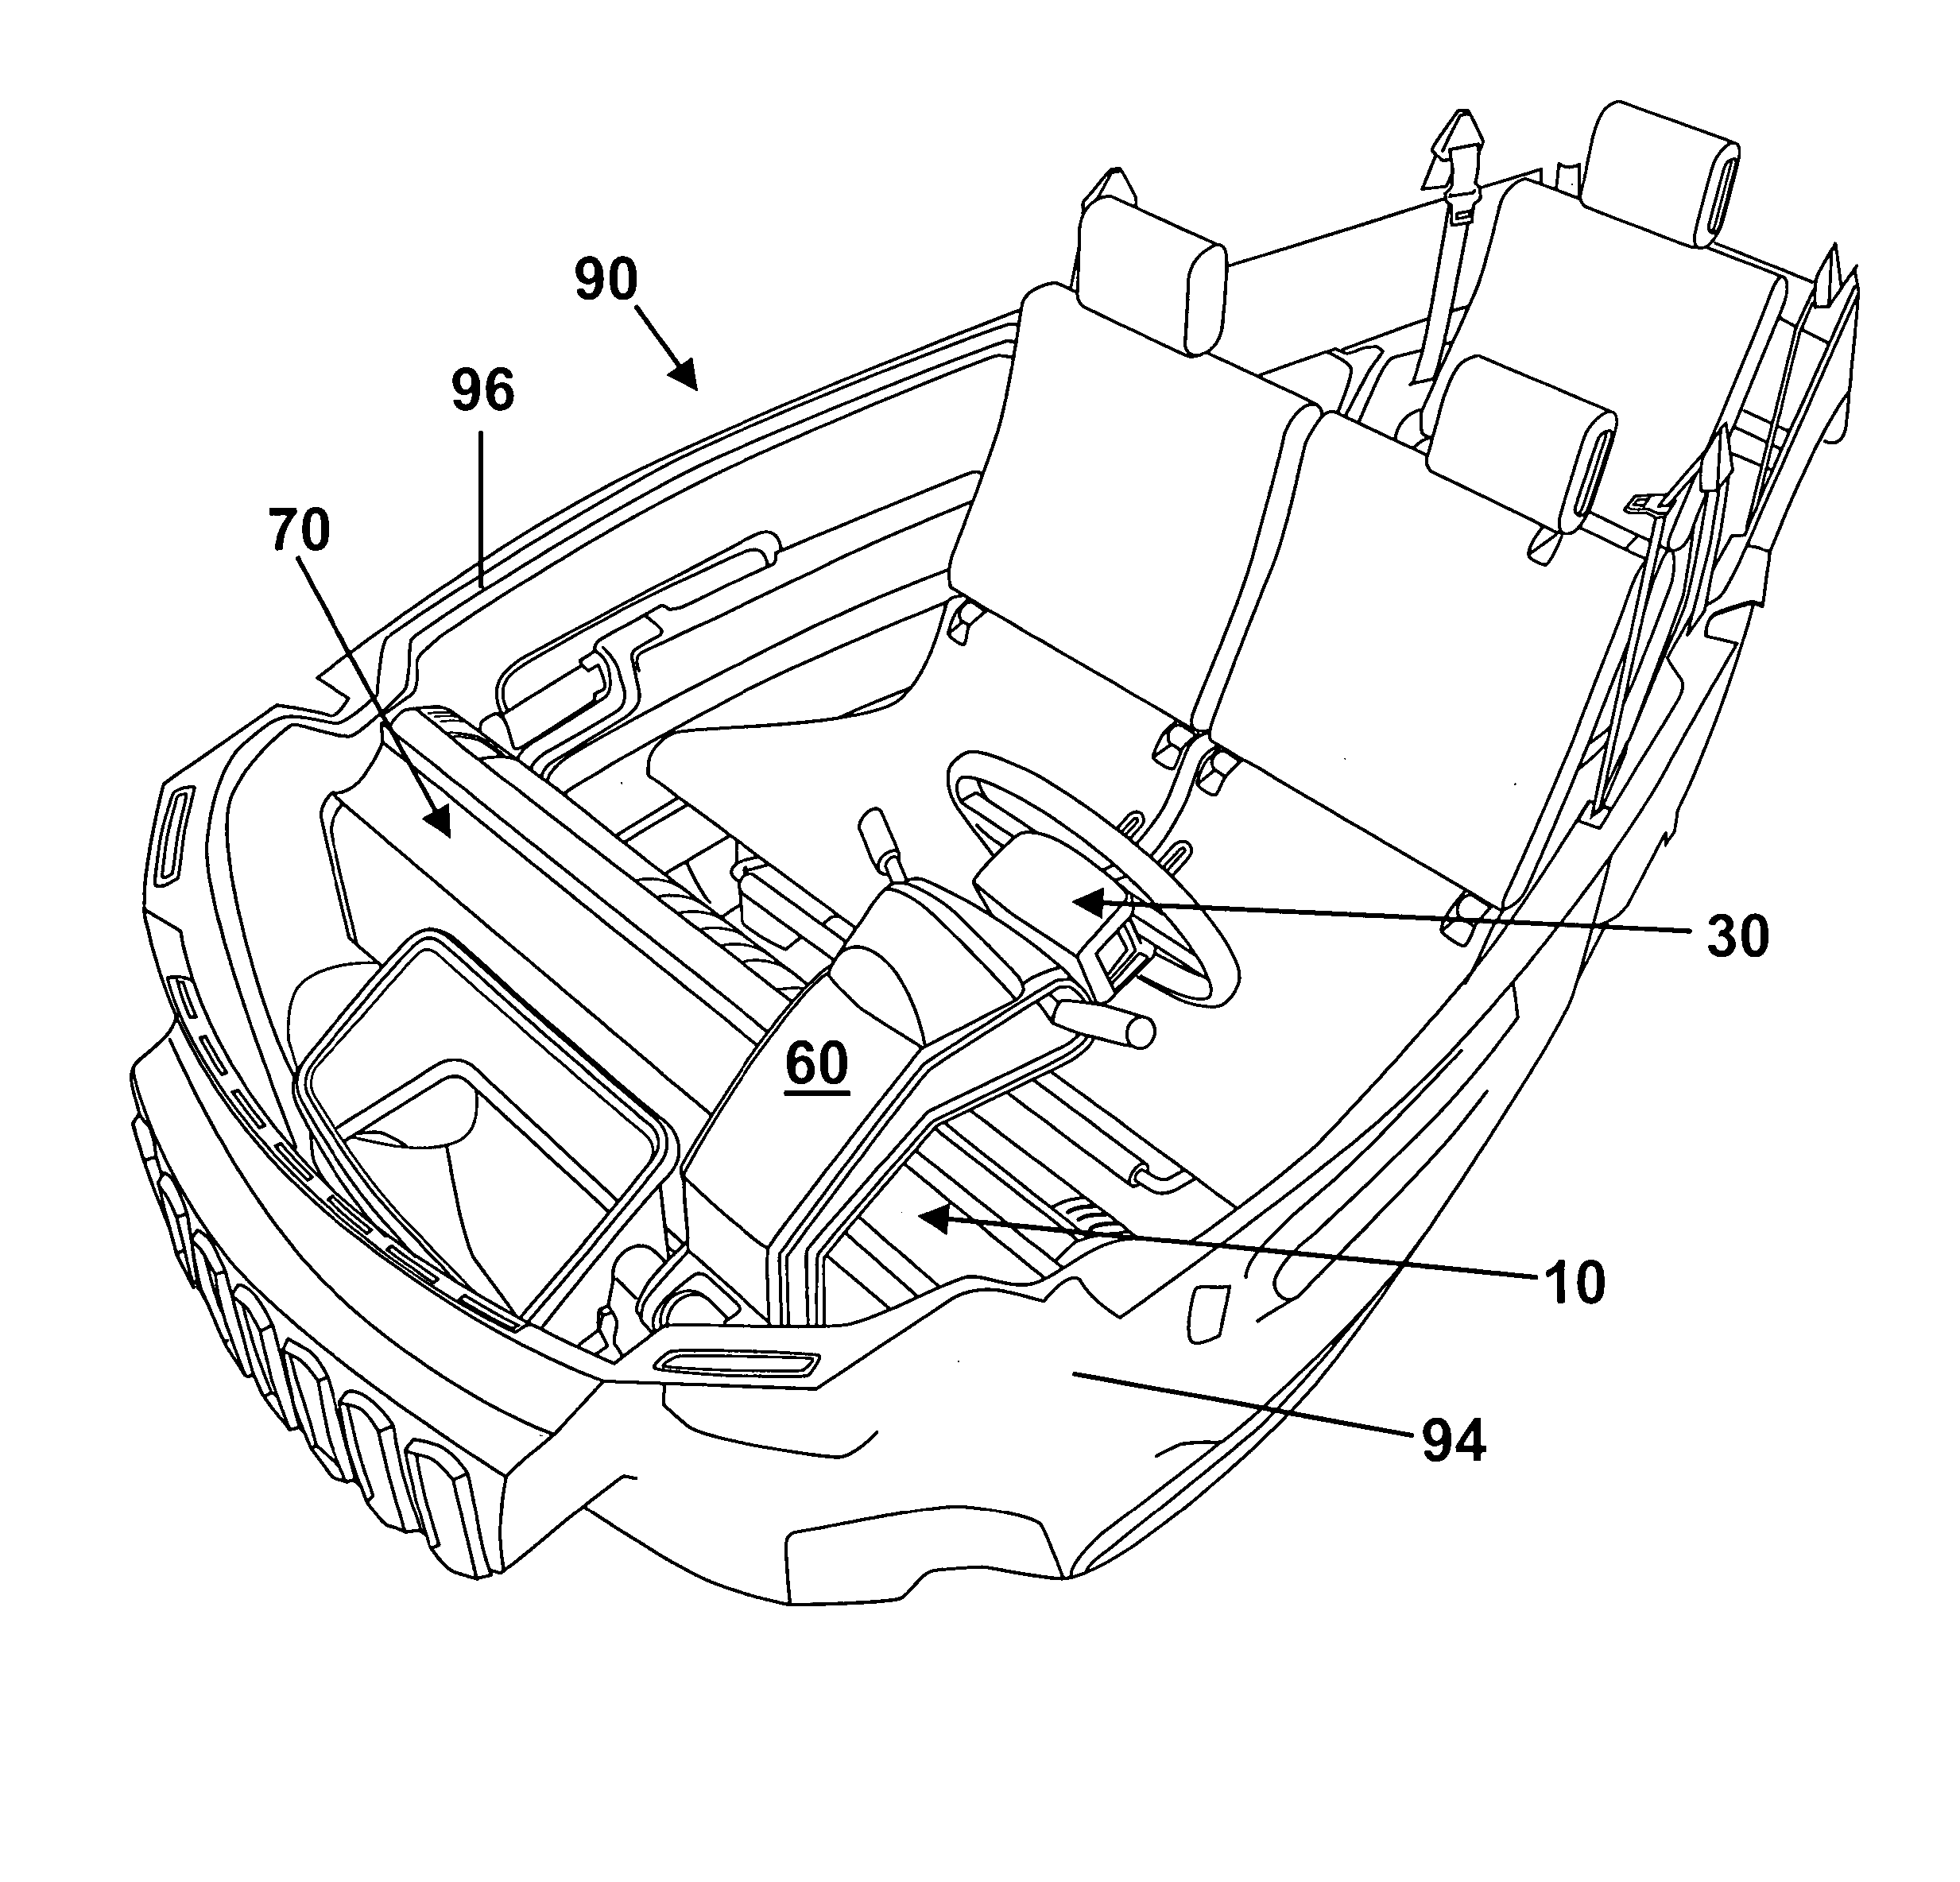 Re-positionable vehicle control-by-wire assembly, method, and system